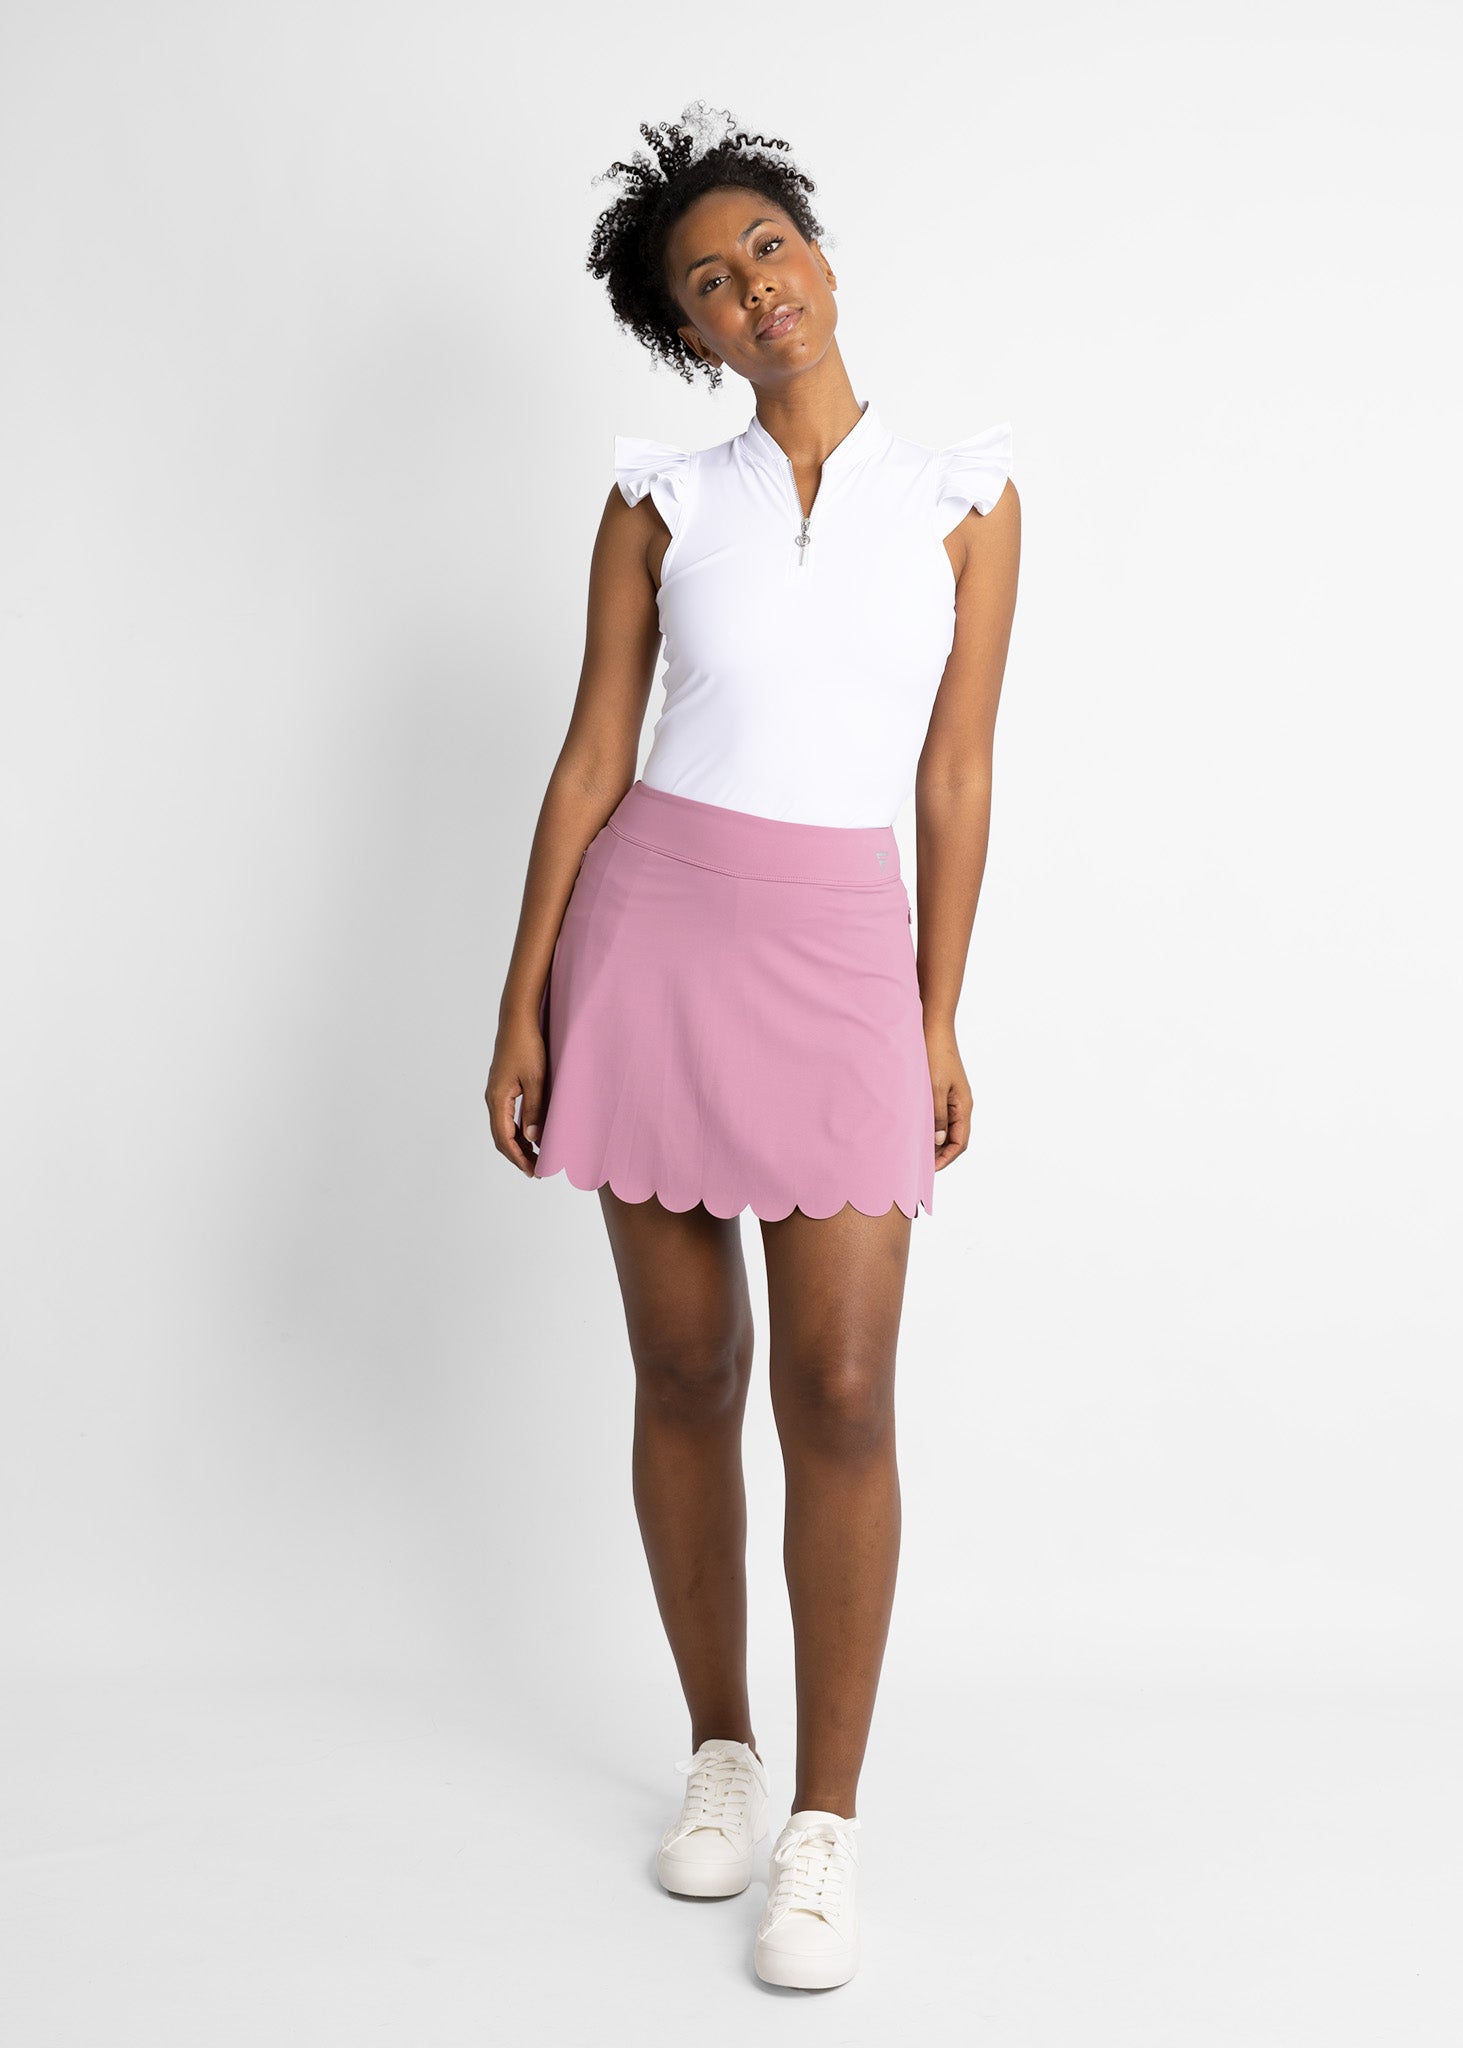 Modern sleeveless golf shirt with ruffle details (colour: white)featured with golf skirt with scallop ending detail (colour: mauve)